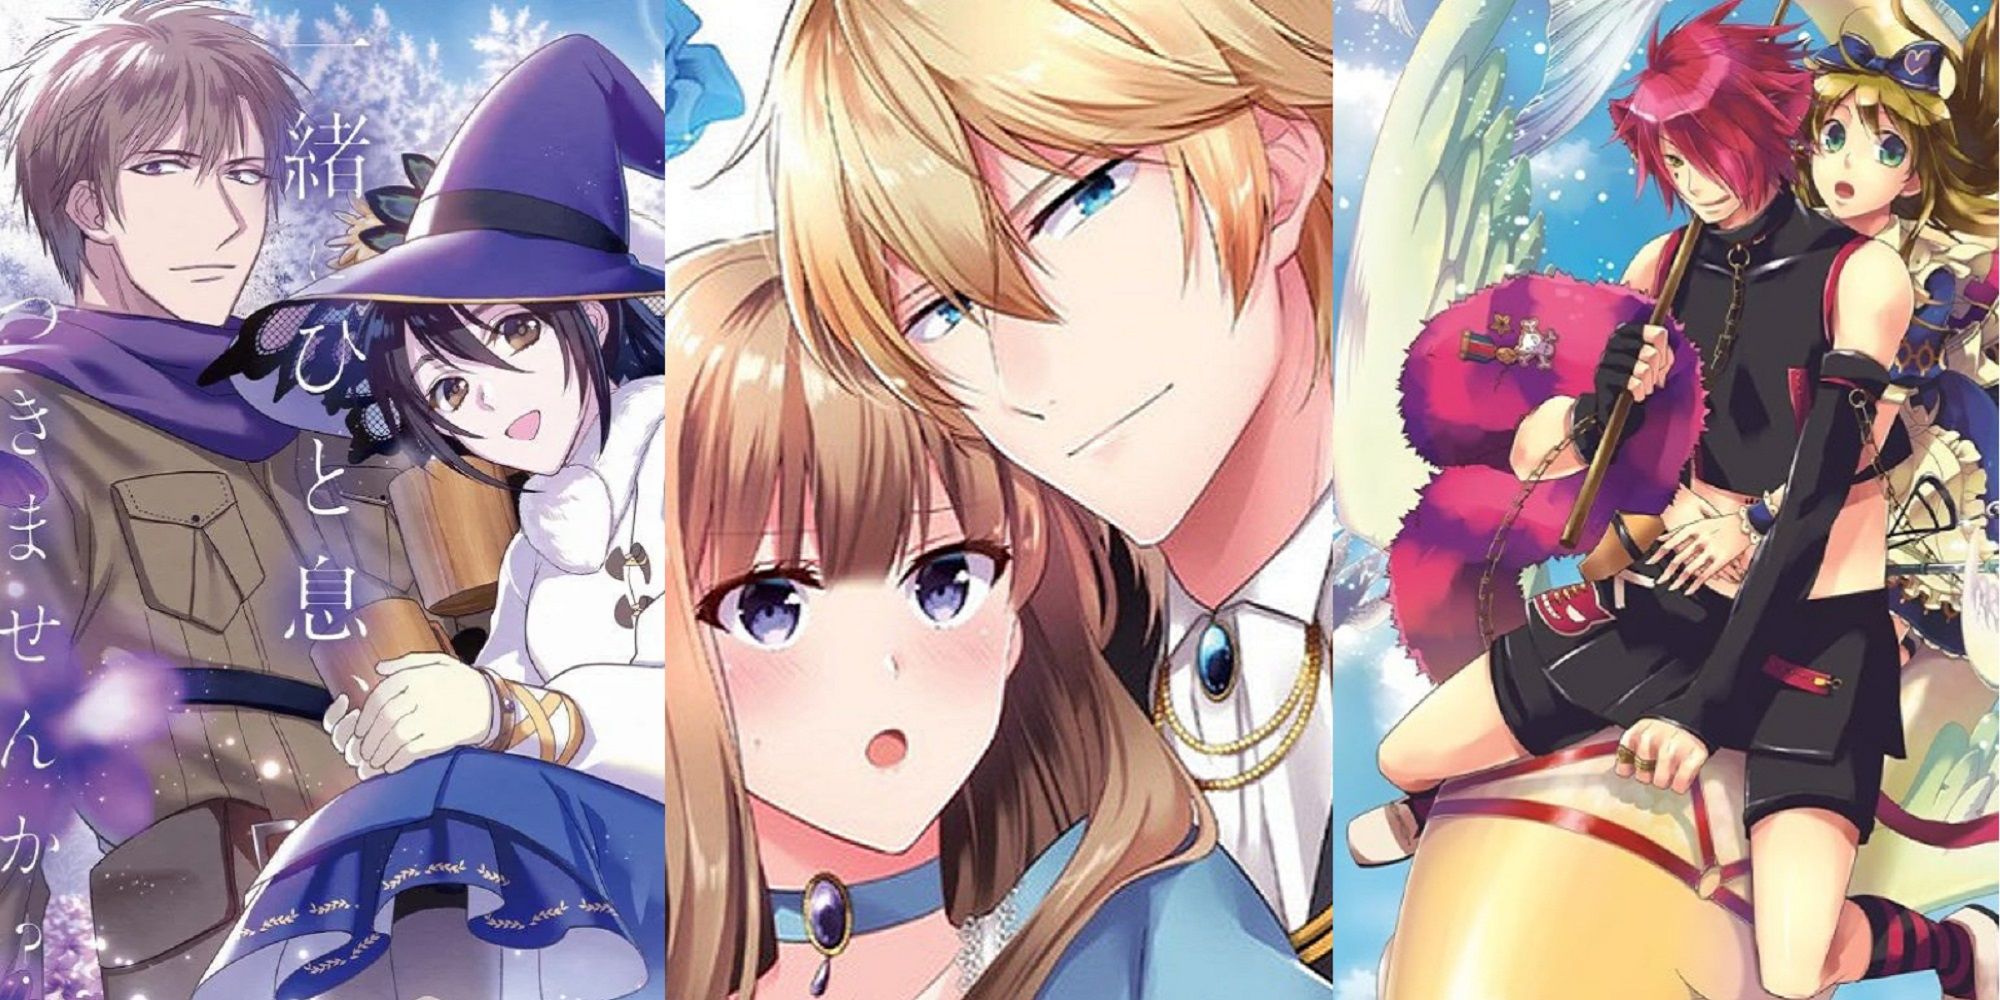 Split image of Alec and Shiori from Housekeeper Mage from Another World, Liddy and Friedrich from I'll Never Be Your Crown Princess, and Alice and Boris from Alice in the Country of Clover manga